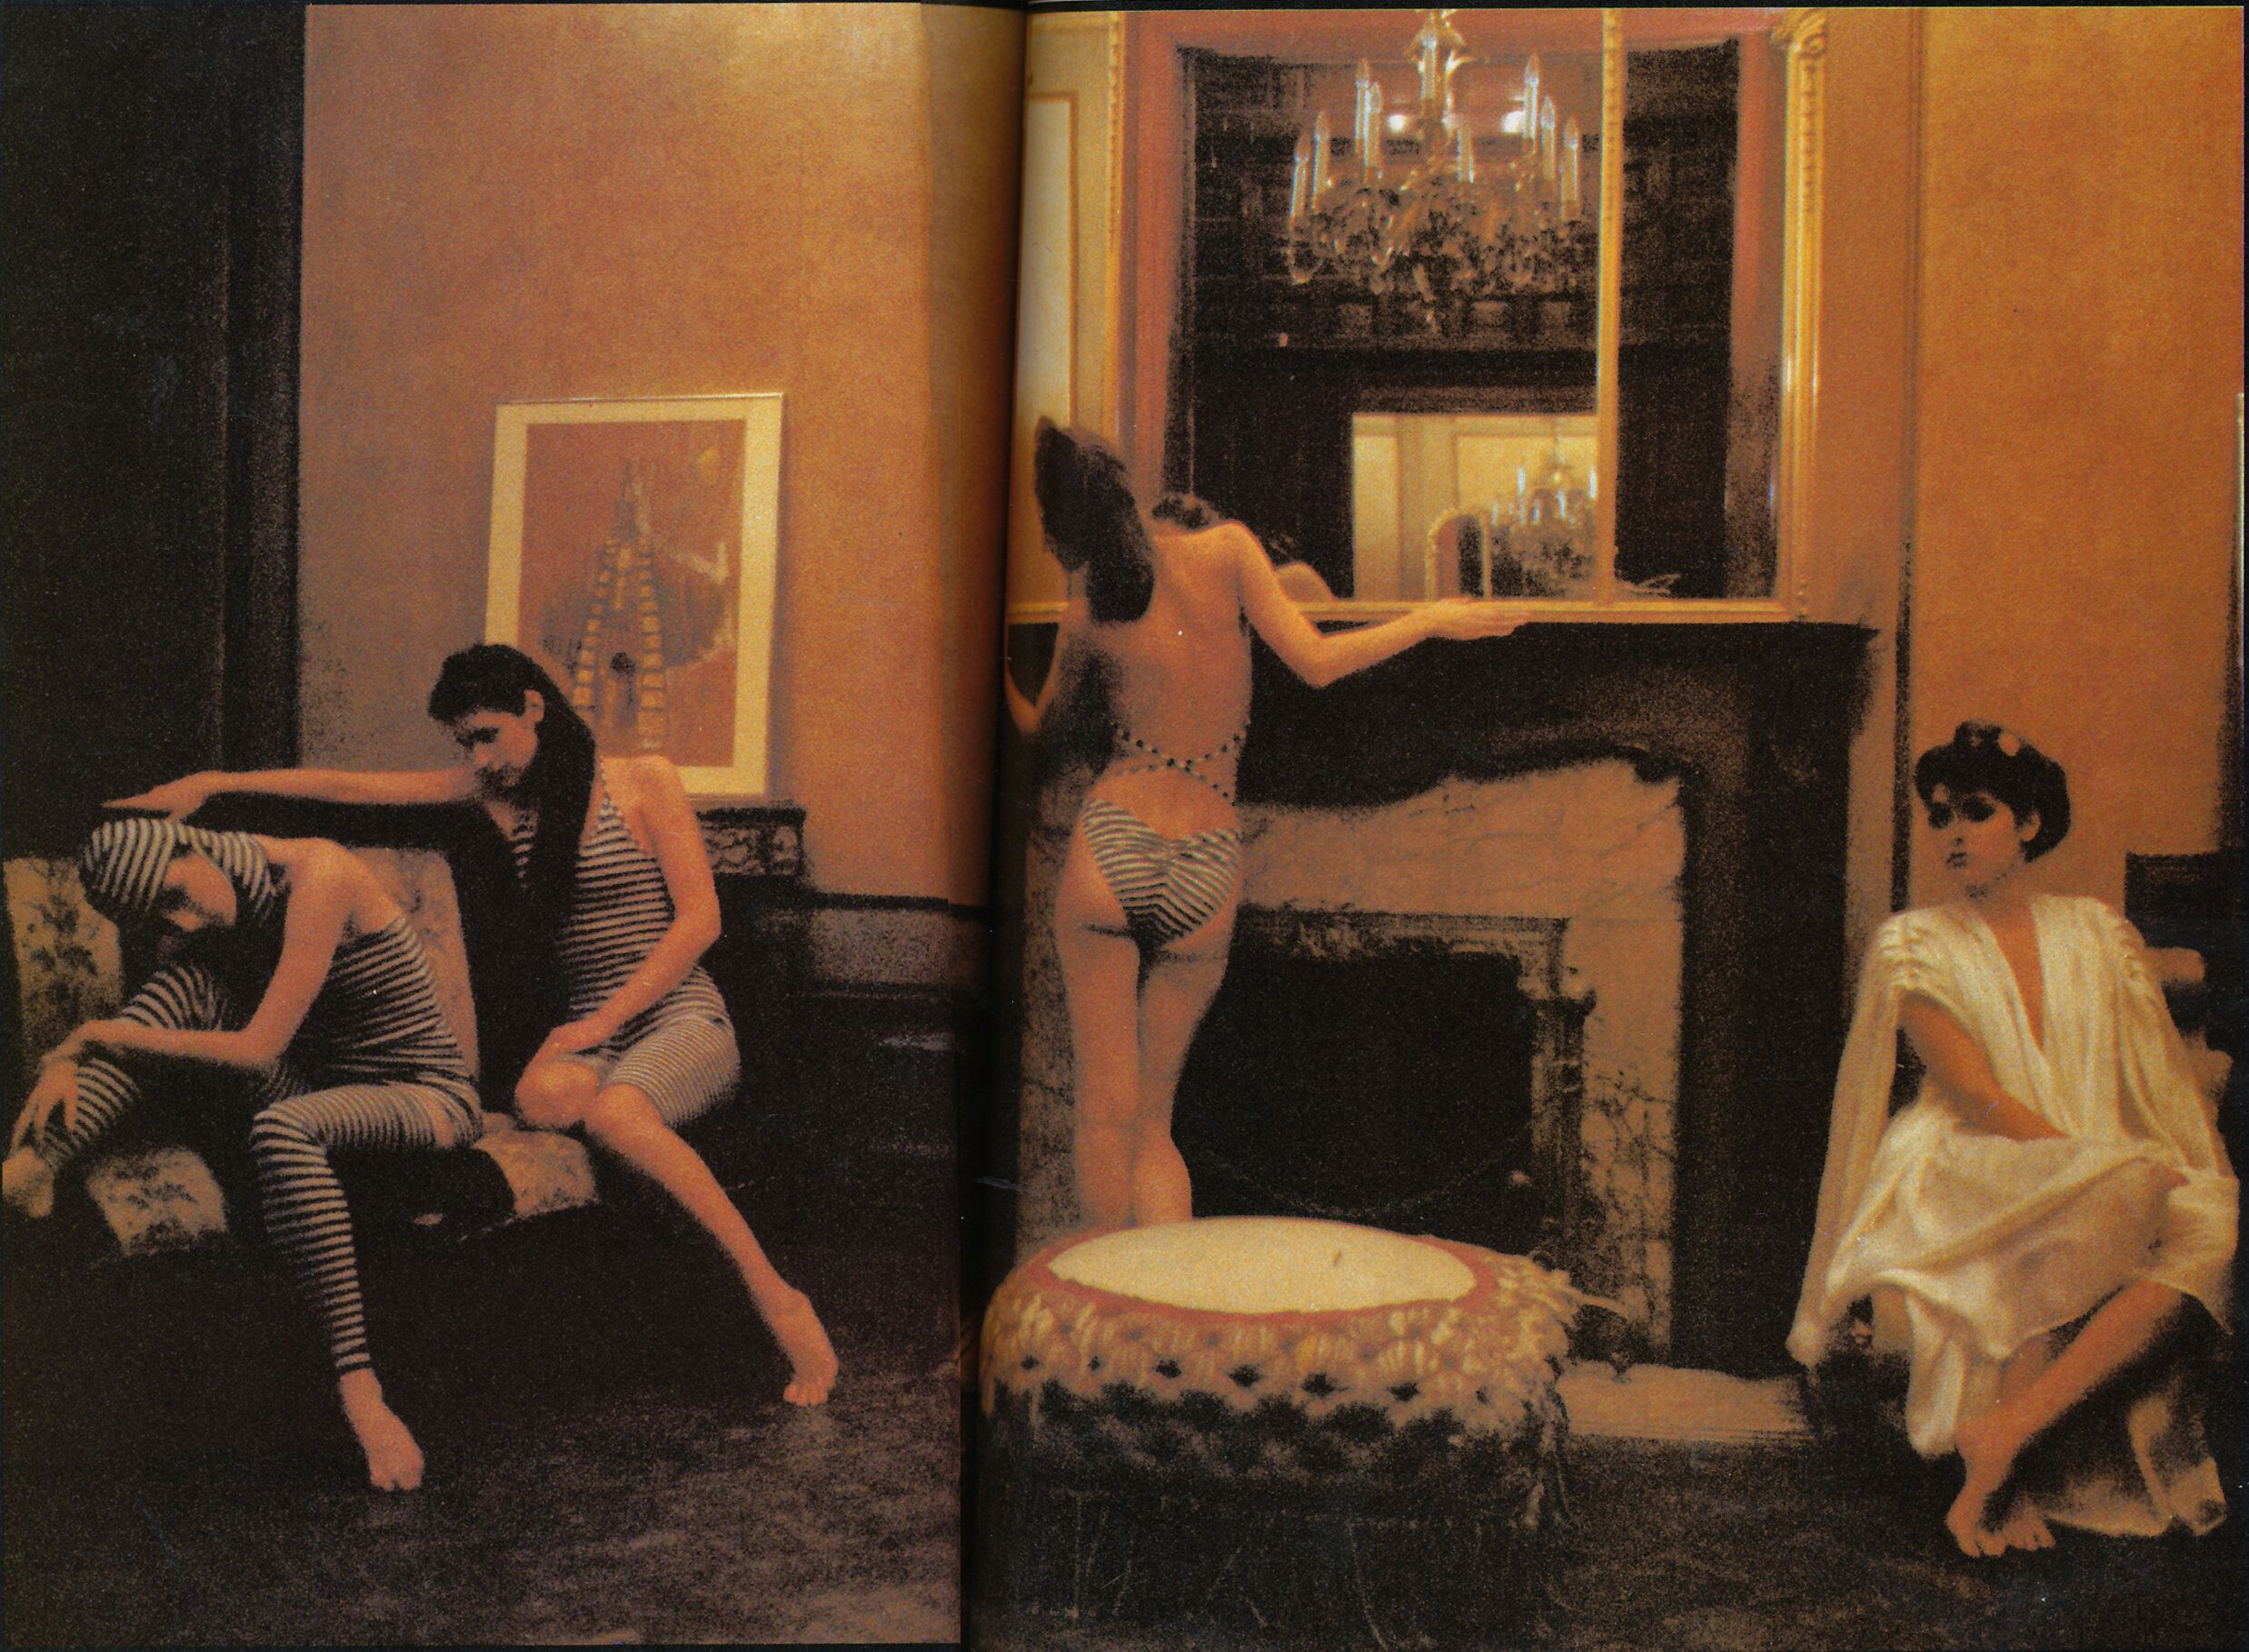 An array of body-conscious and flowing Kamali looks; Deborah Turbeville for Viva, June 1978.